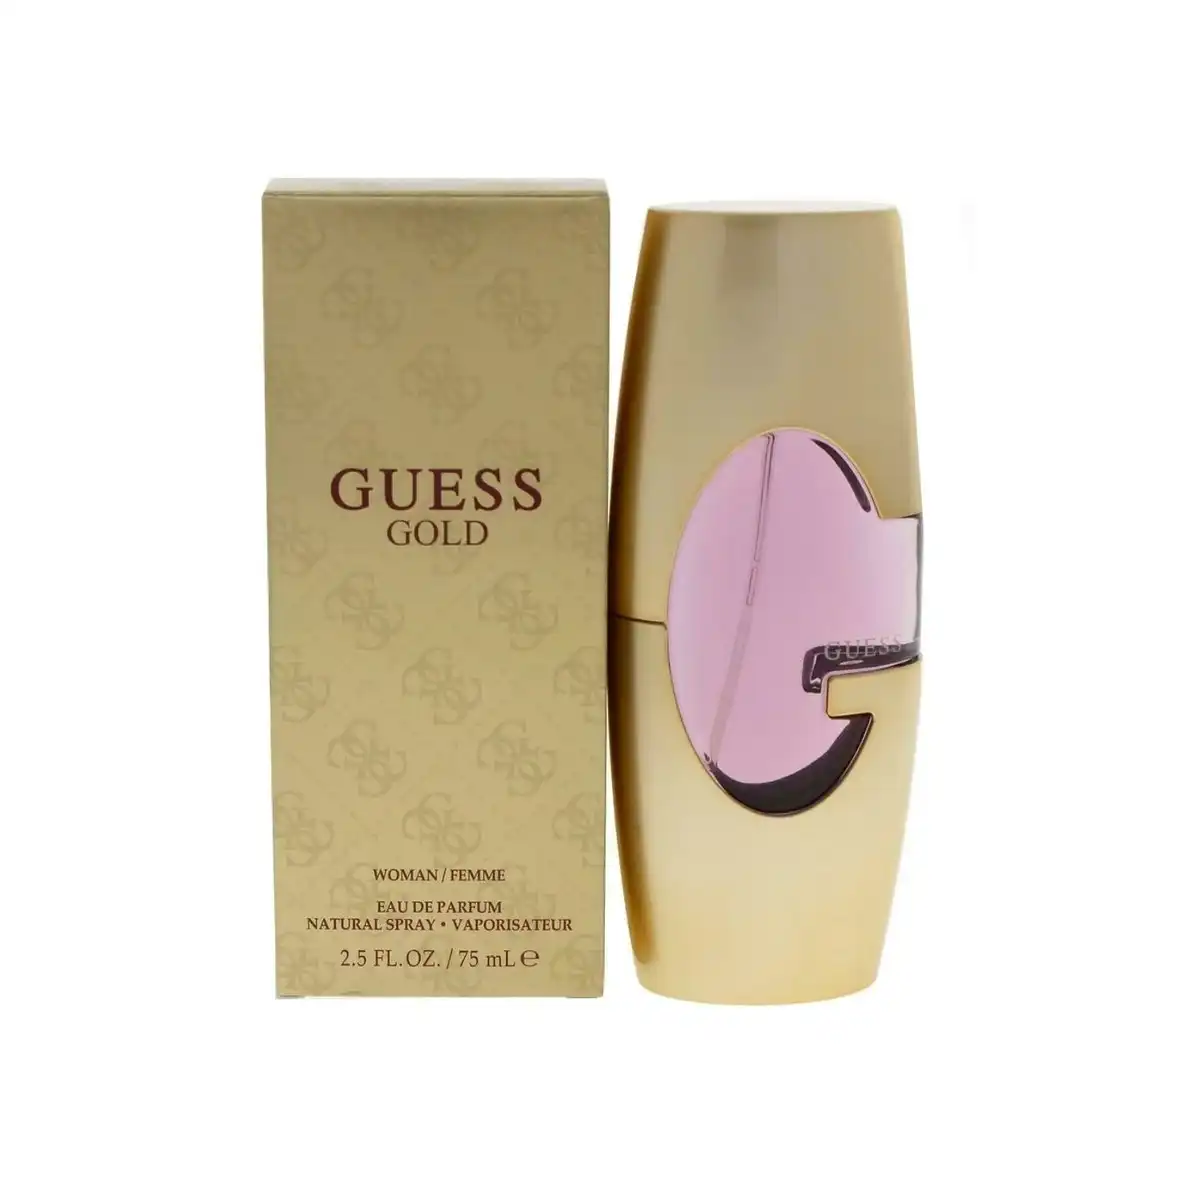 Guess Gold by Guess EDP Spray 75ml For Women